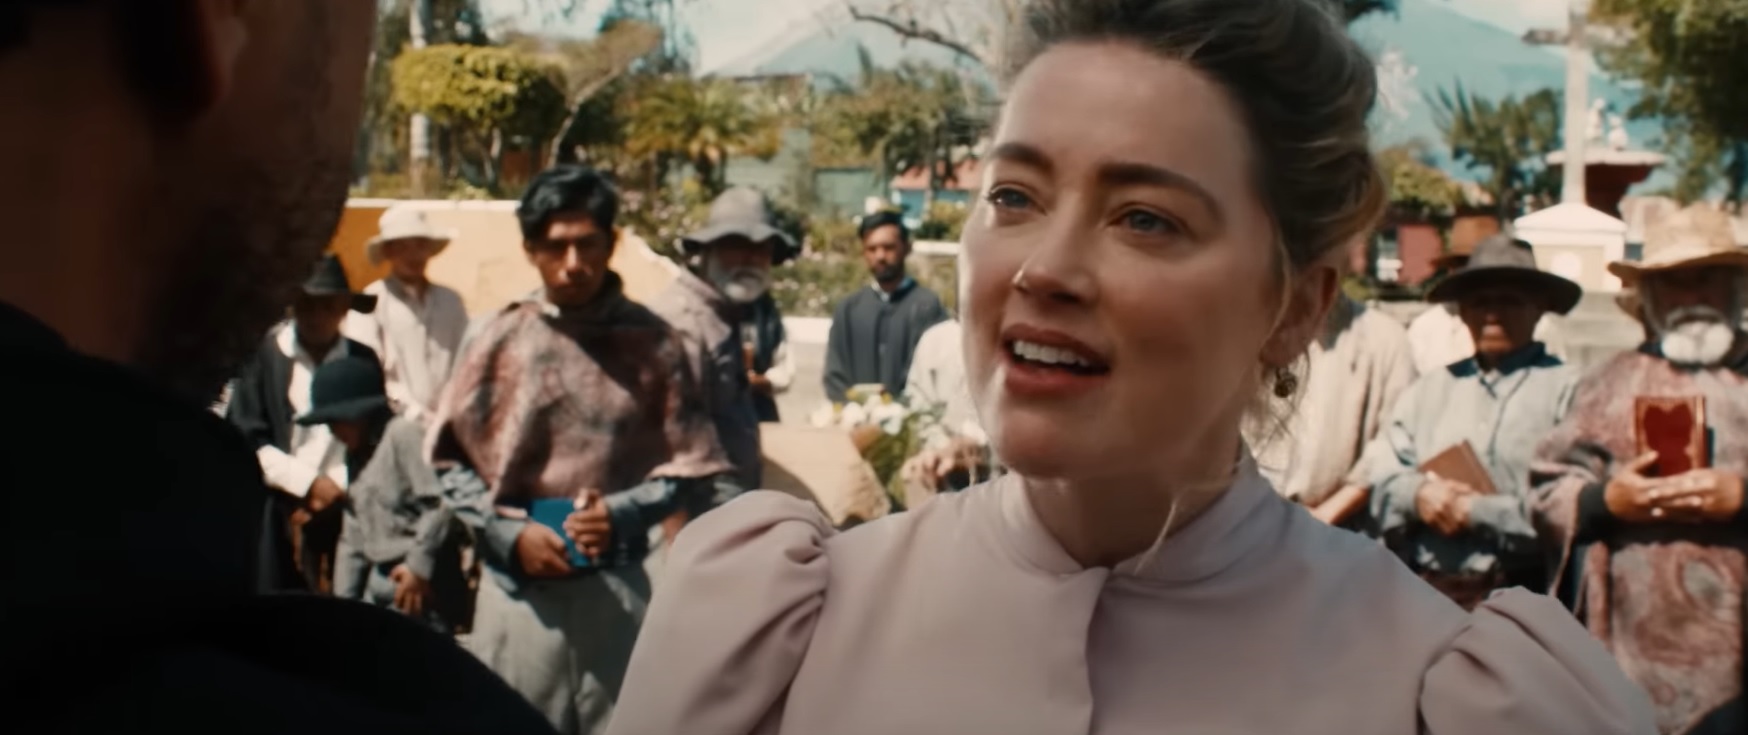 In The Fire Trailer Has Amber Heard Starring Role As a Physician Who Doesn’t Believe in Exorcism